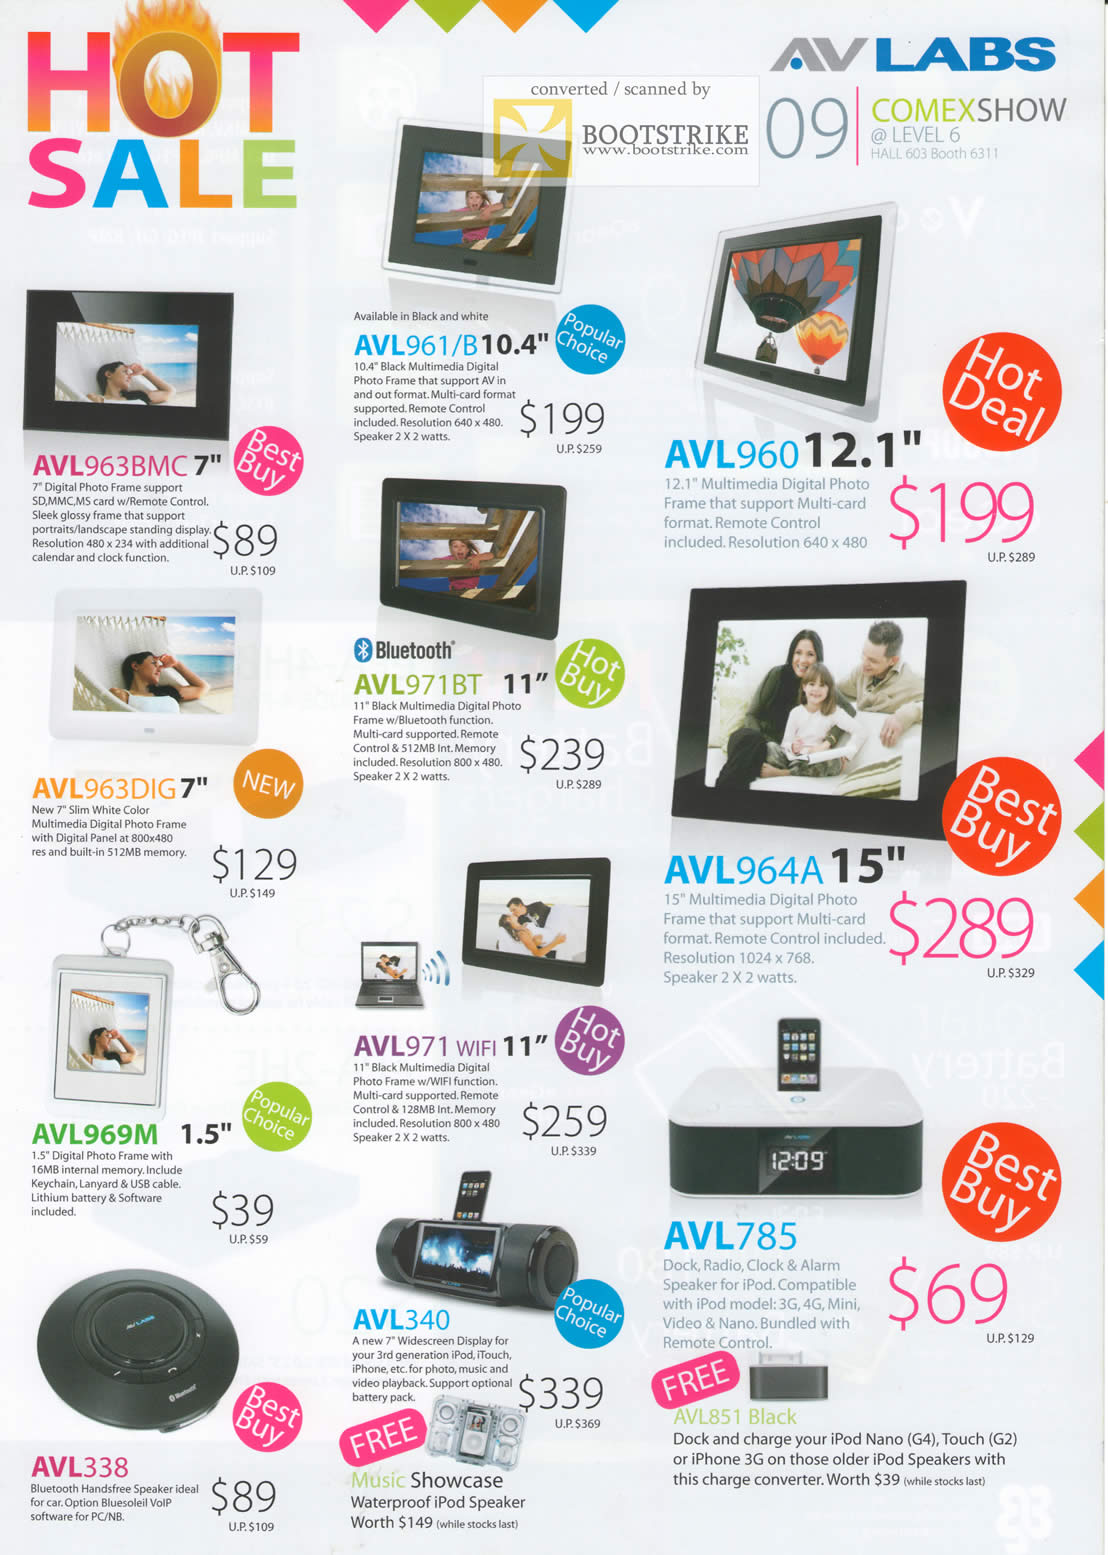 Comex 2009 price list image brochure of AVLabs Digital Photo Frame Bluetooth Card Reader AV IN OUT Remote Control